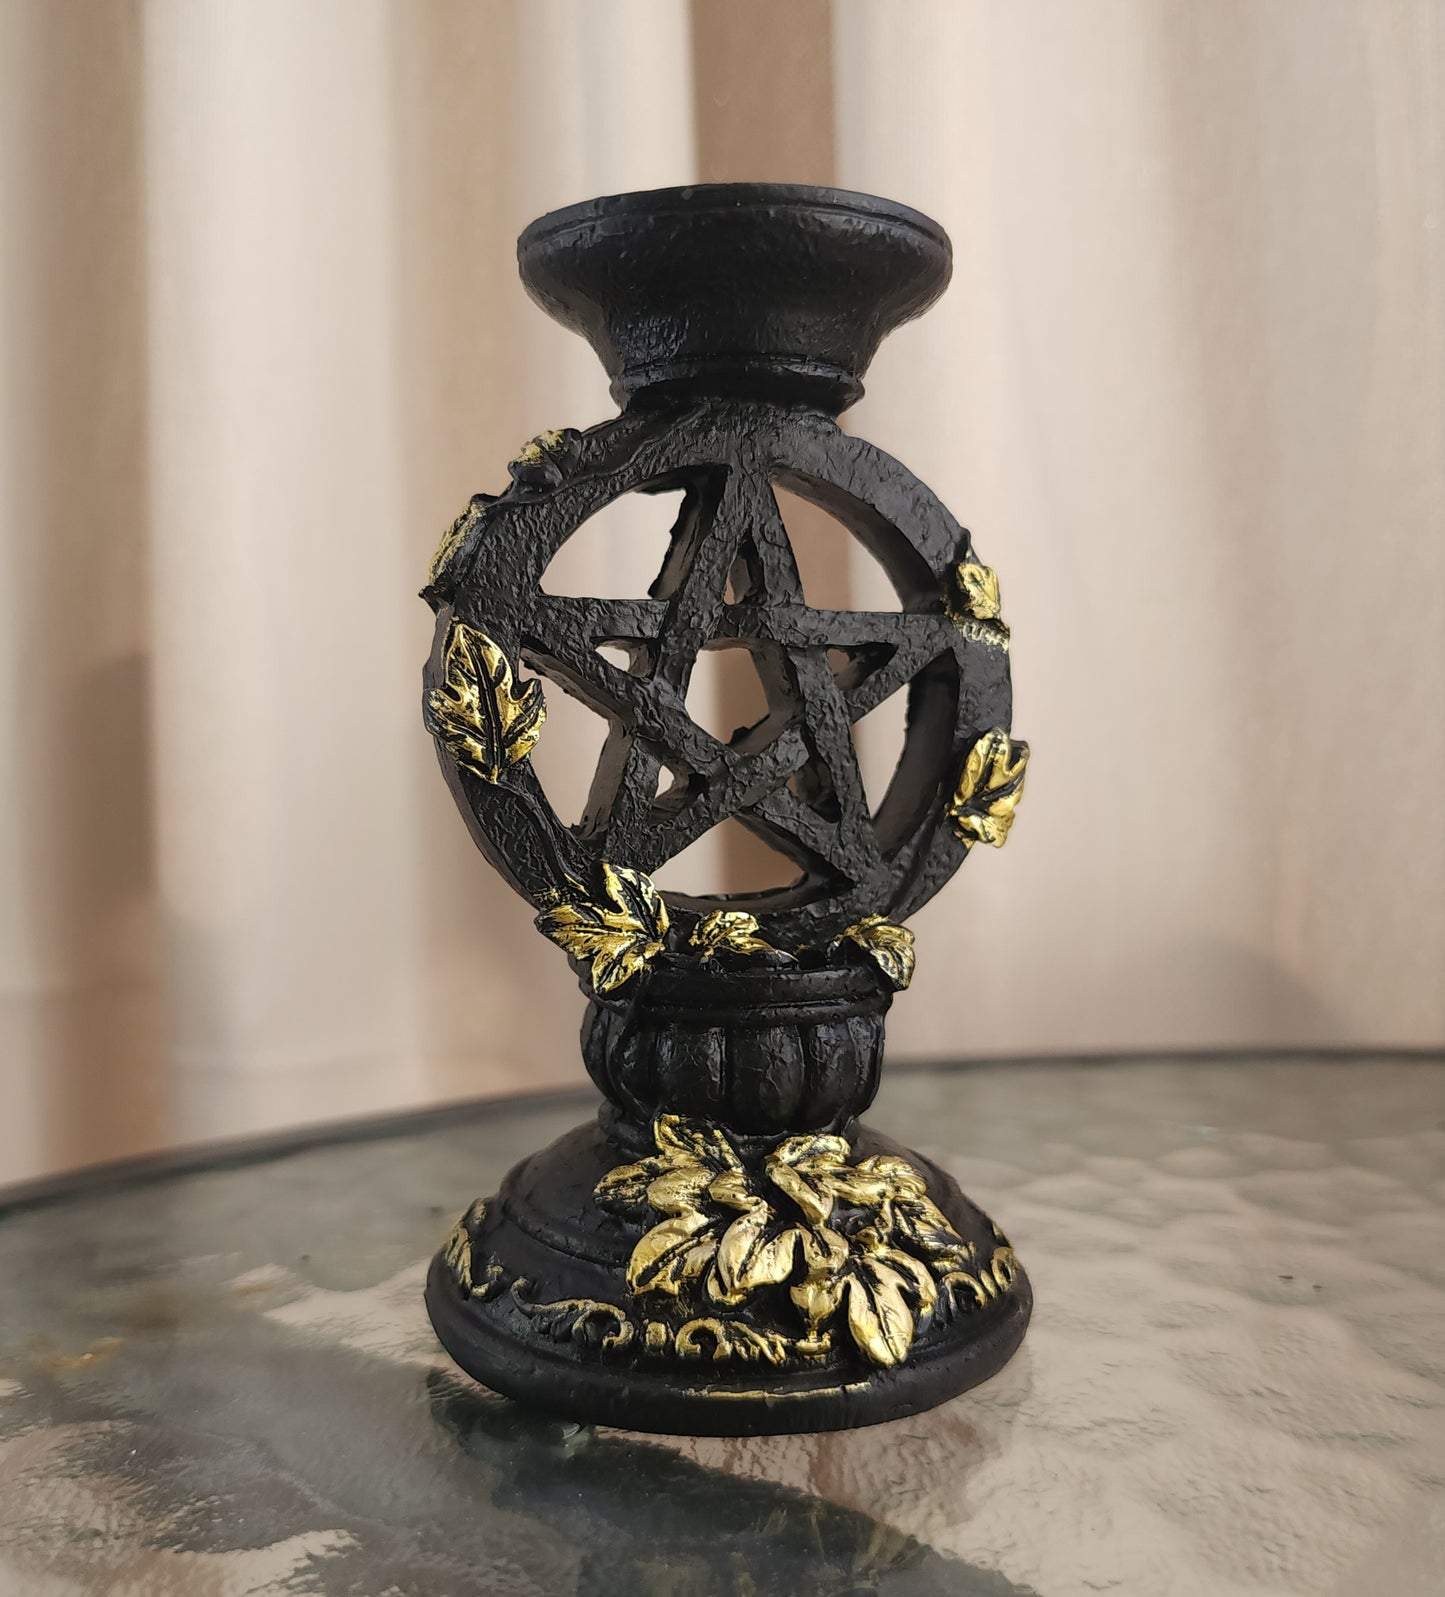 Pentacle Sphere Stand - Black & Gold